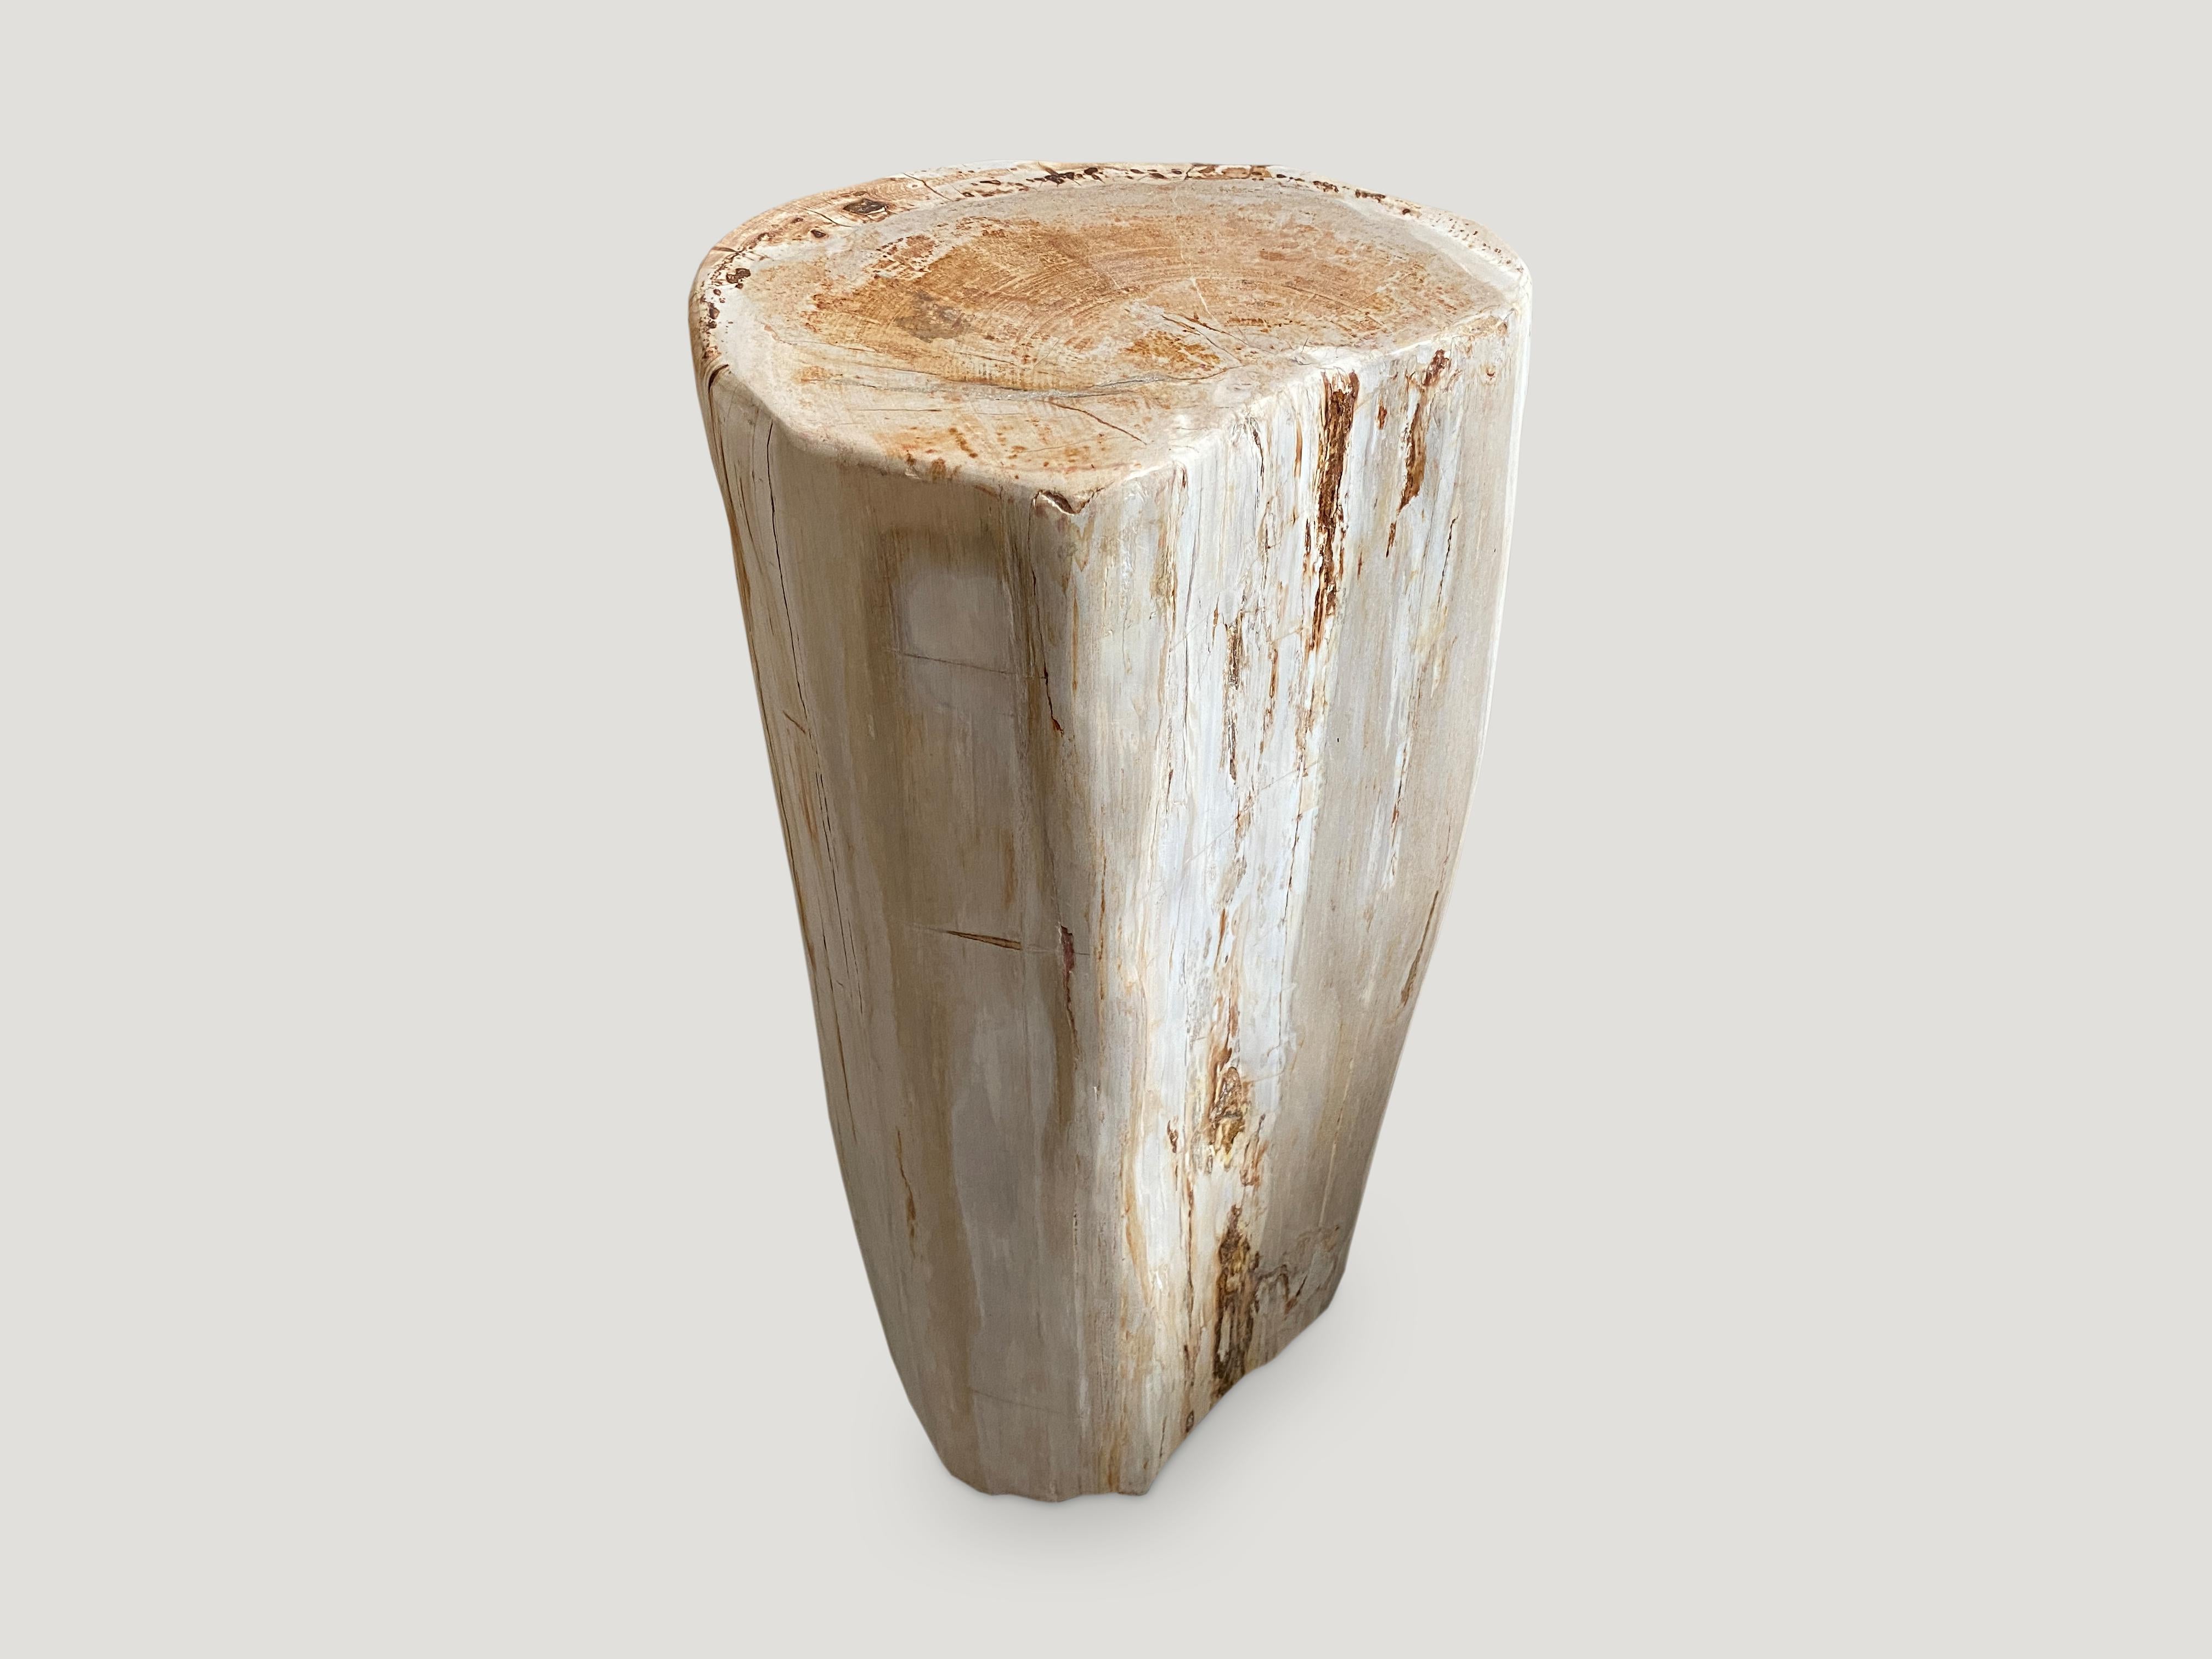 Pale peach and cream tones on this high quality Minimalist petrified wood side table or pedestal. It’s fascinating how Mother Nature produces these stunning 40 million year old petrified teak logs with such beautiful colors with natural patterns